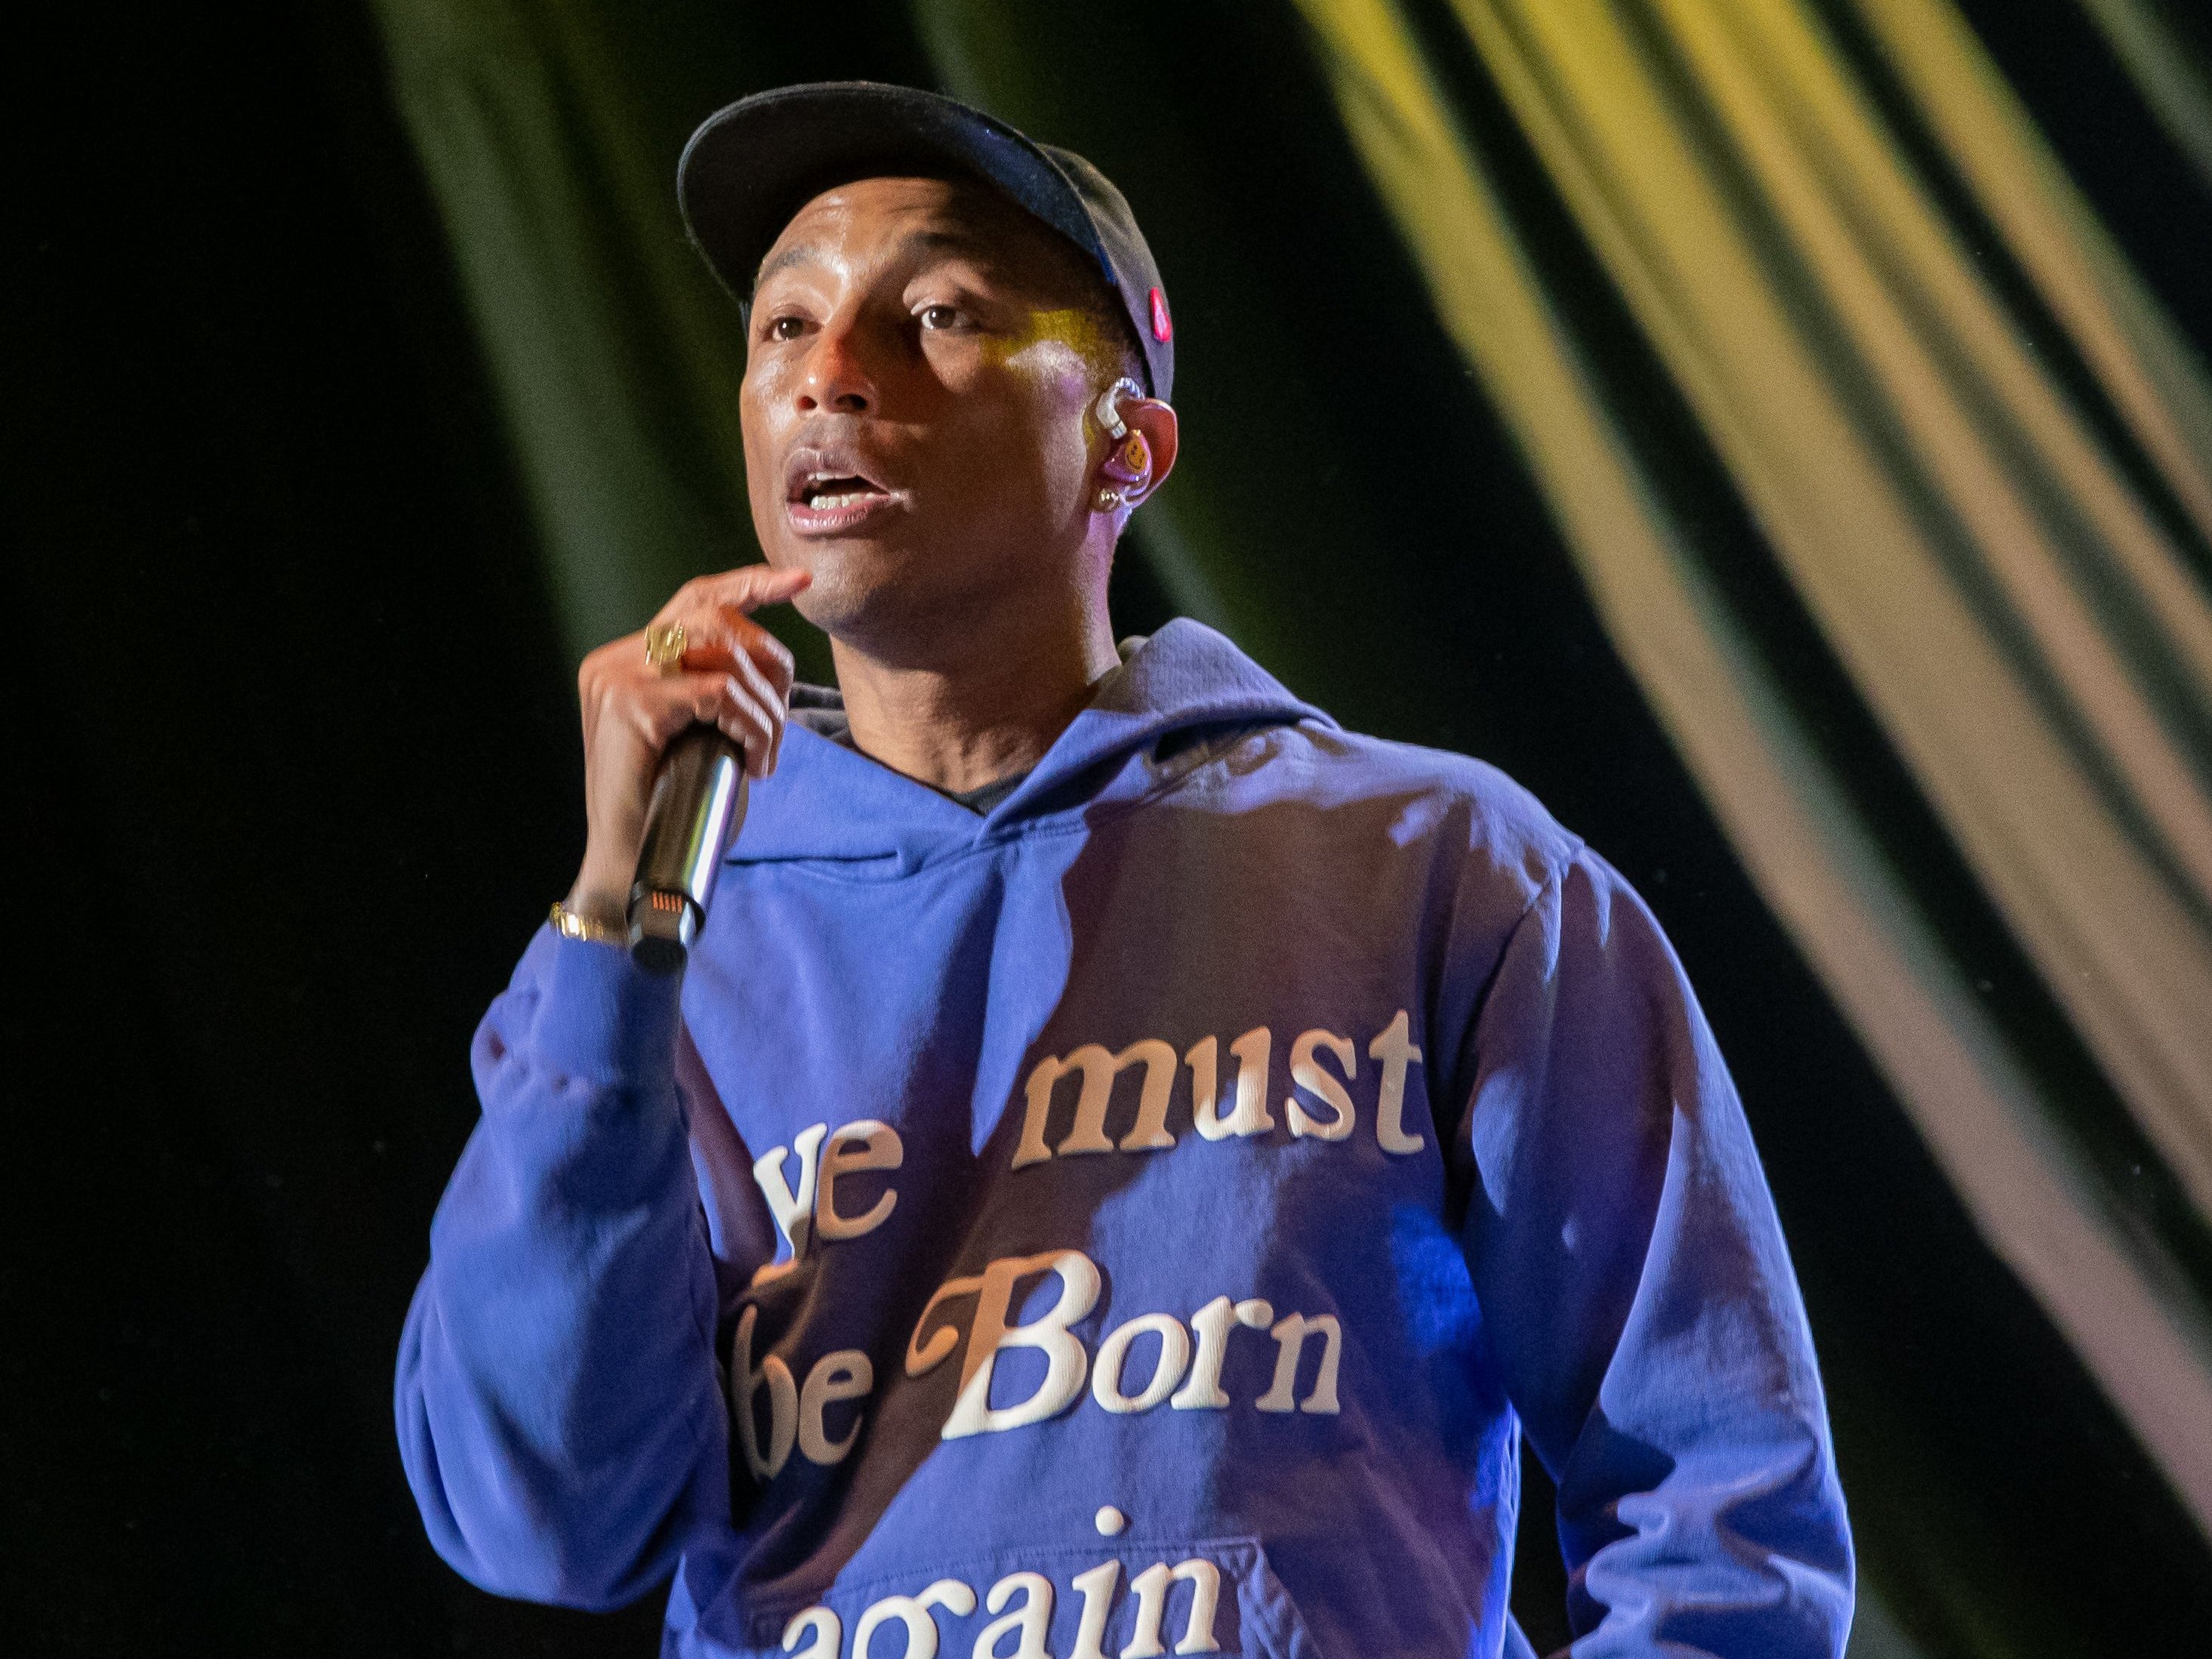 Pharrell Williams performs at the Astroworld Festival on 9 November 2019 in Houston, Texas